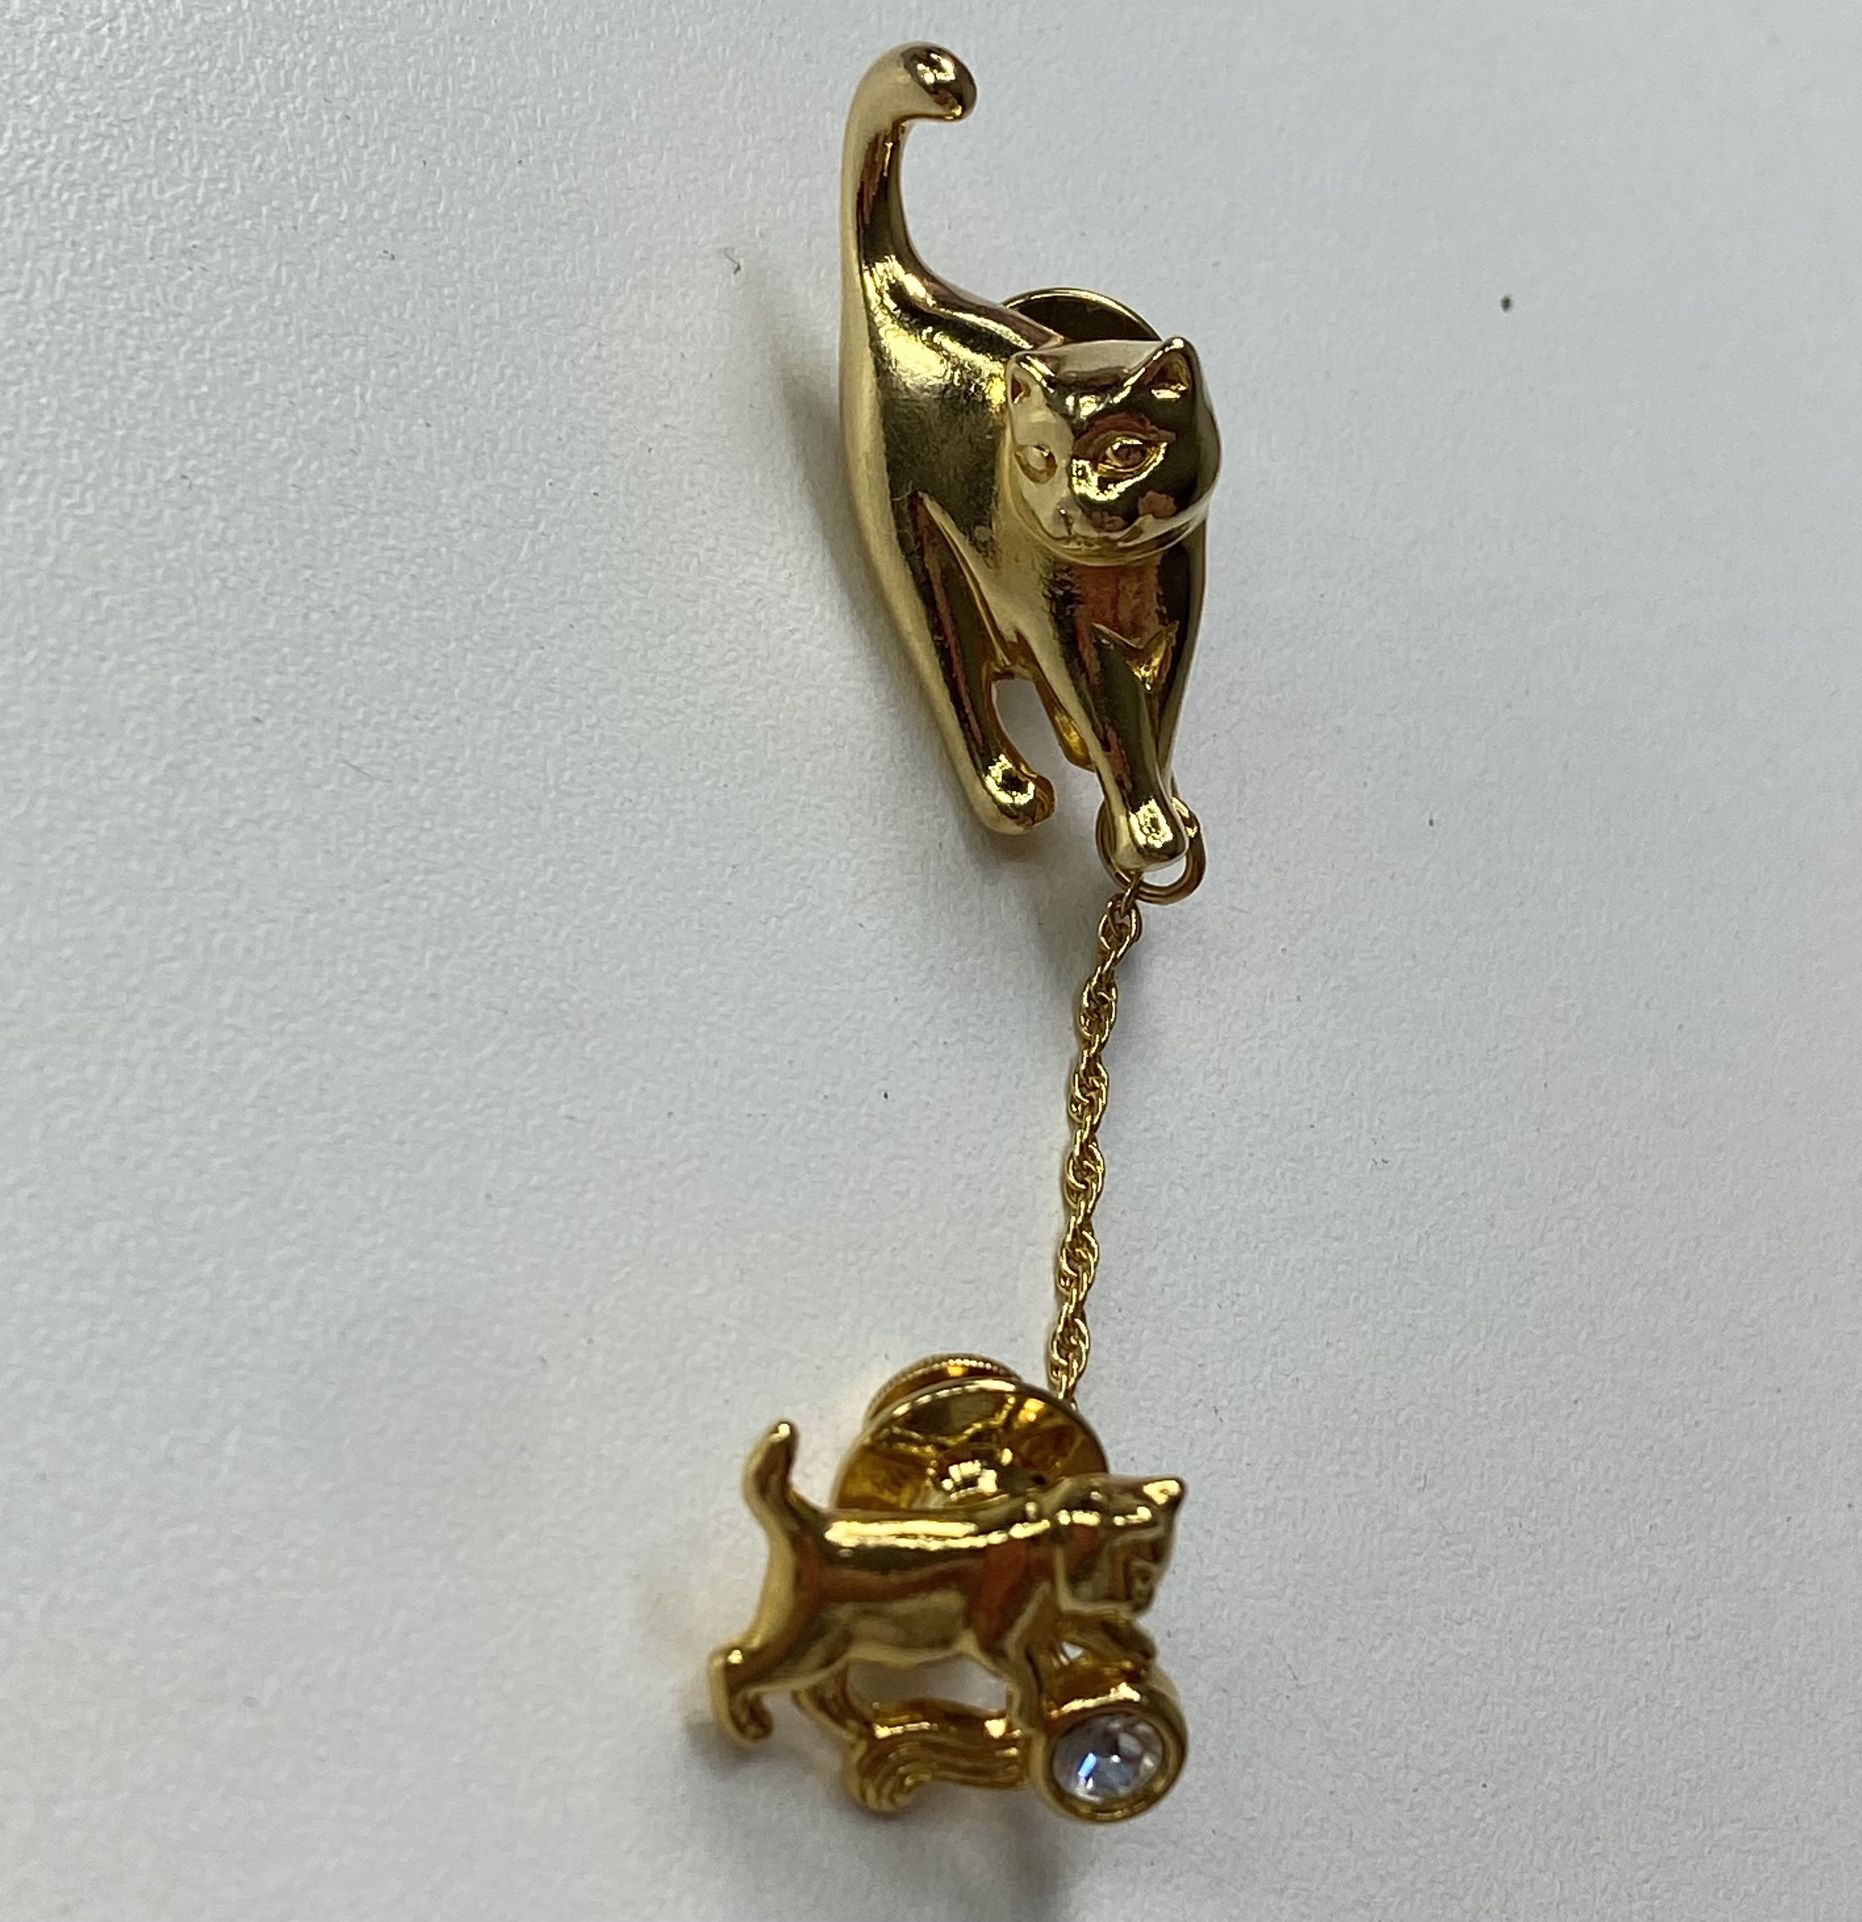 Vintage Avon kitty cats brooch pin  Jewelry . Accessories